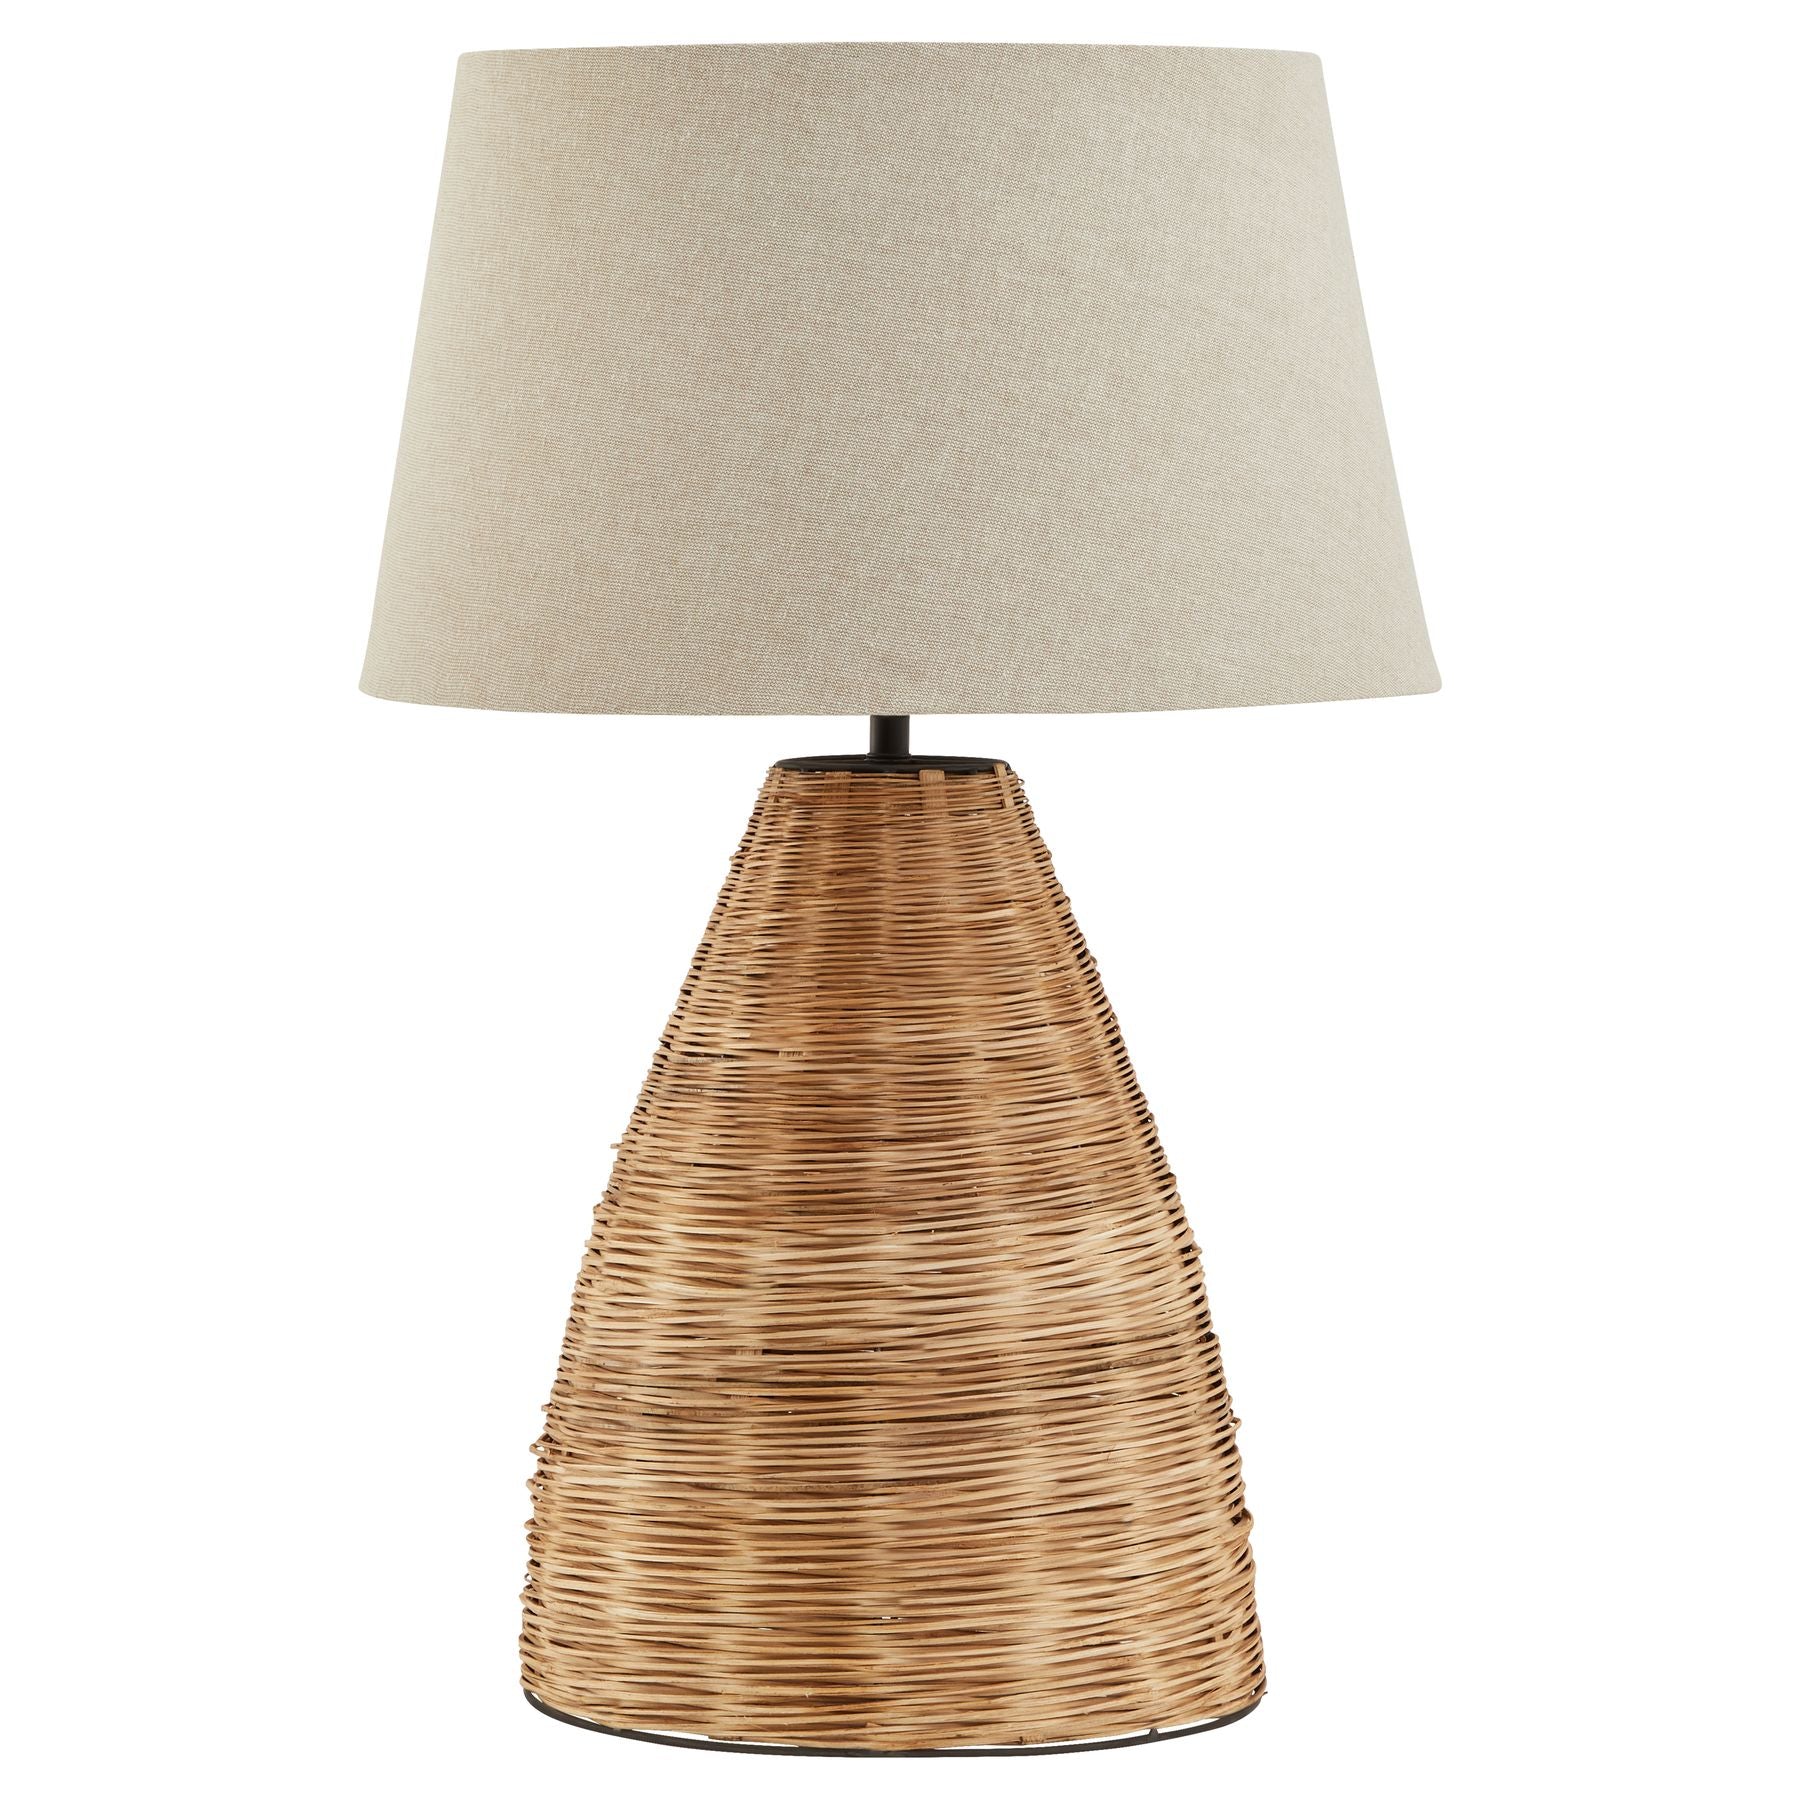 View Conical Wicker Table Lamp With Linen Shade information